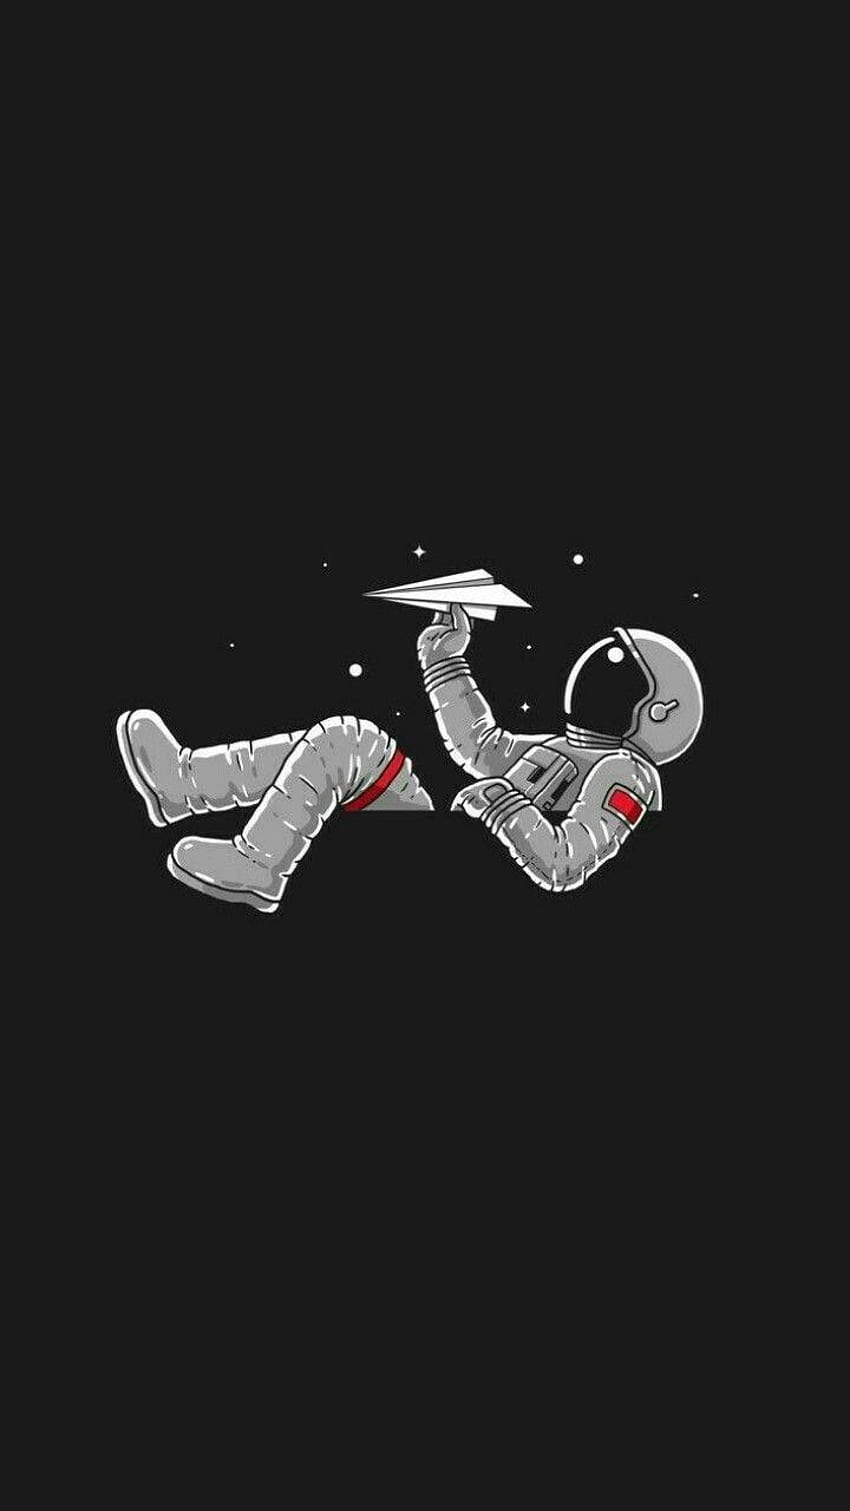 Black Mobile : Top 30 Best Black Mobile Background, Falling Astronaut iPhone HD phone wallpaper